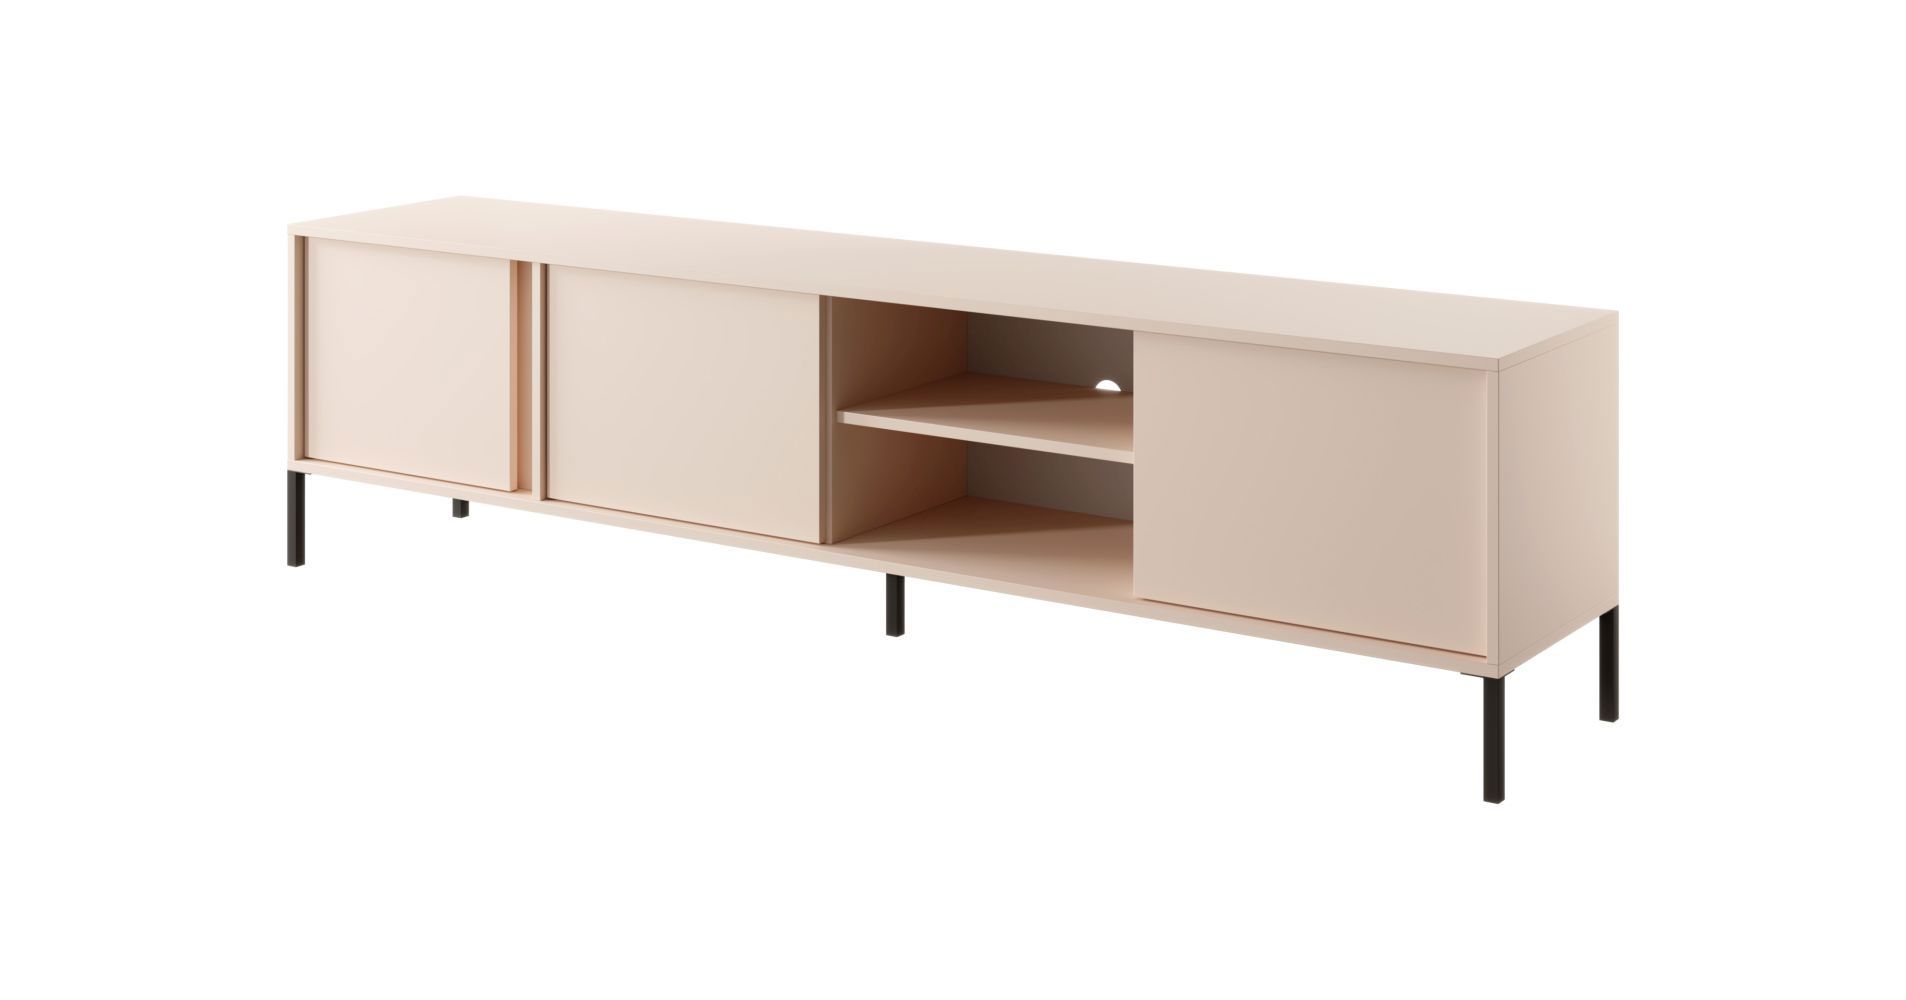 TV cabinet with ample storage space Zaghouan 09, color: Beige - Dimensions: 53.5 x 202.9 x 39.5 cm (H x W x D)